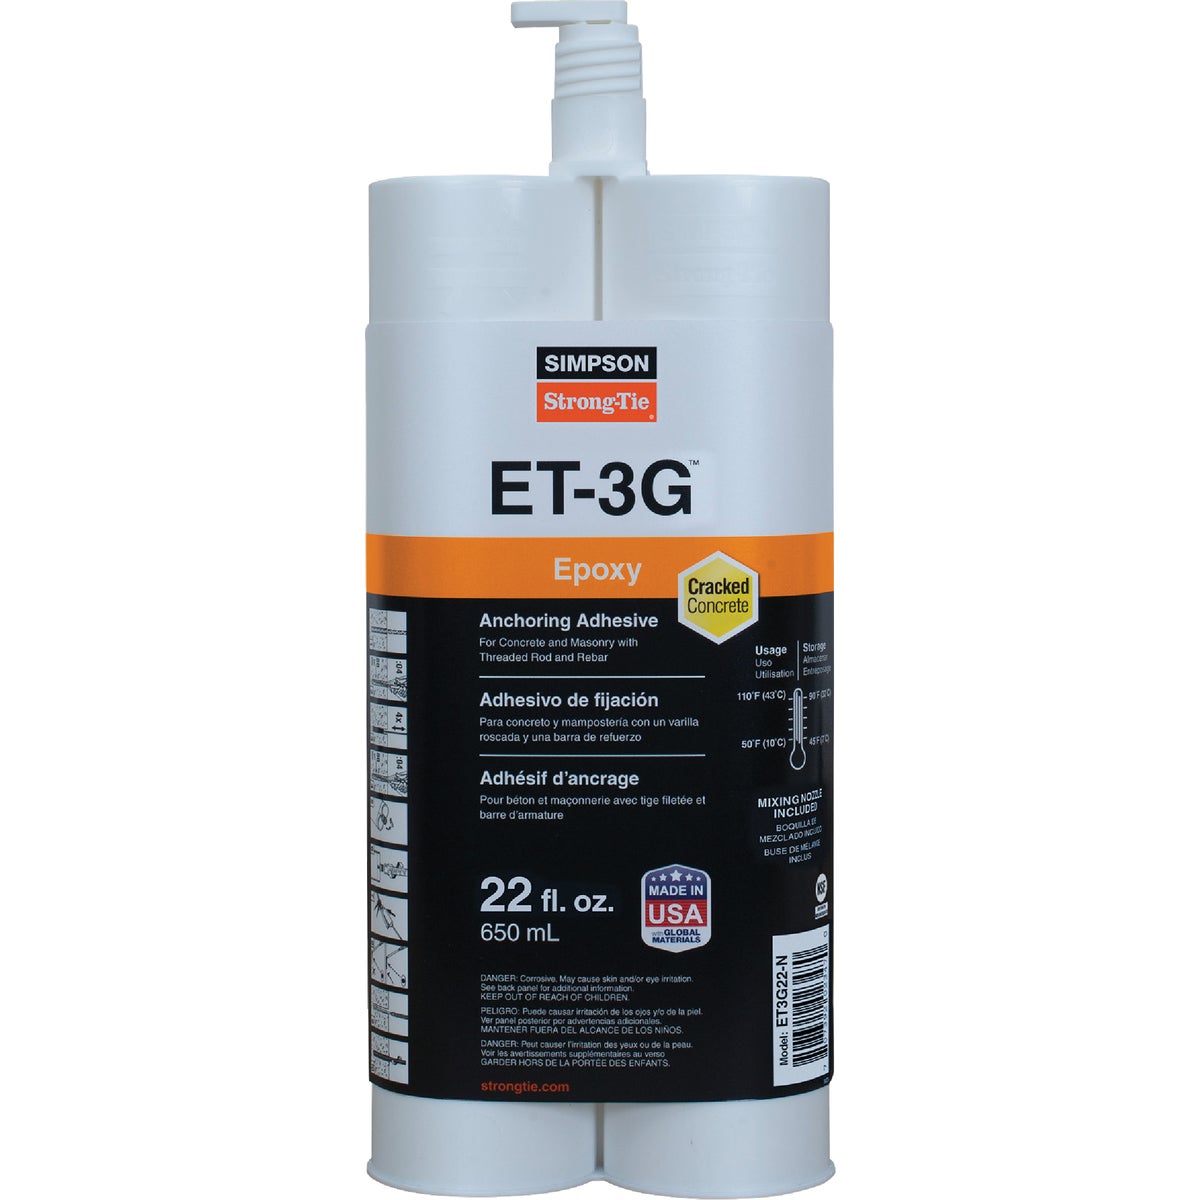 Item 200005, ET-3G is a two-component, high-solids, epoxy-based system ideal for general